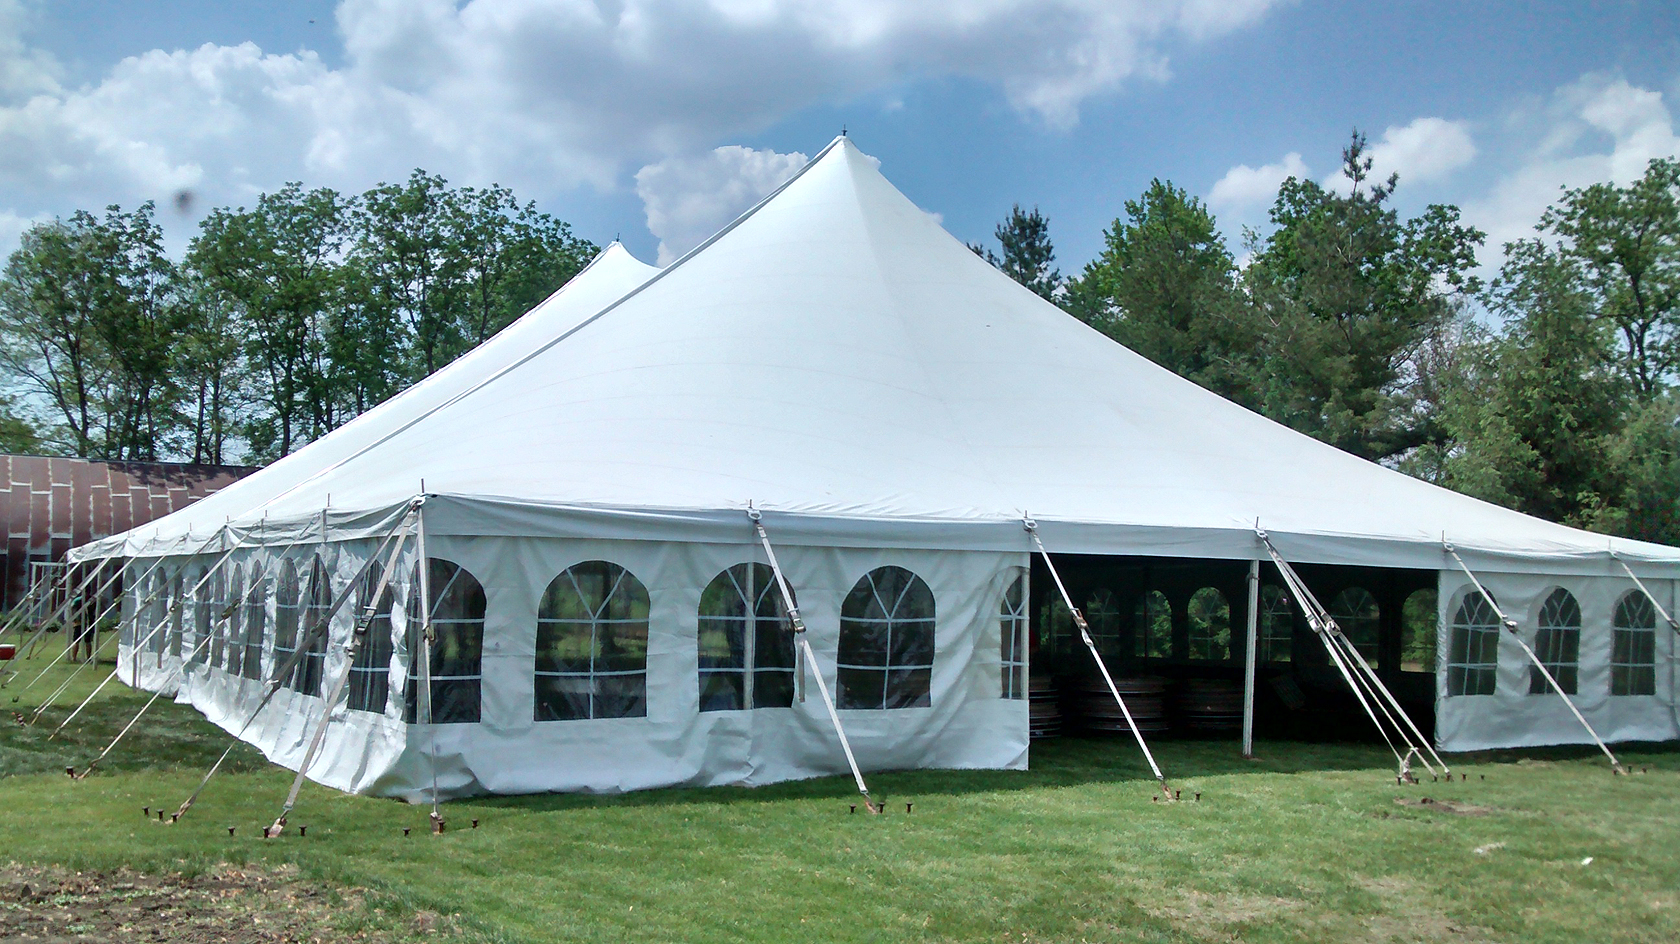 View of 60' x 90' Genesis rope and pole tent in Wedding in Wellman